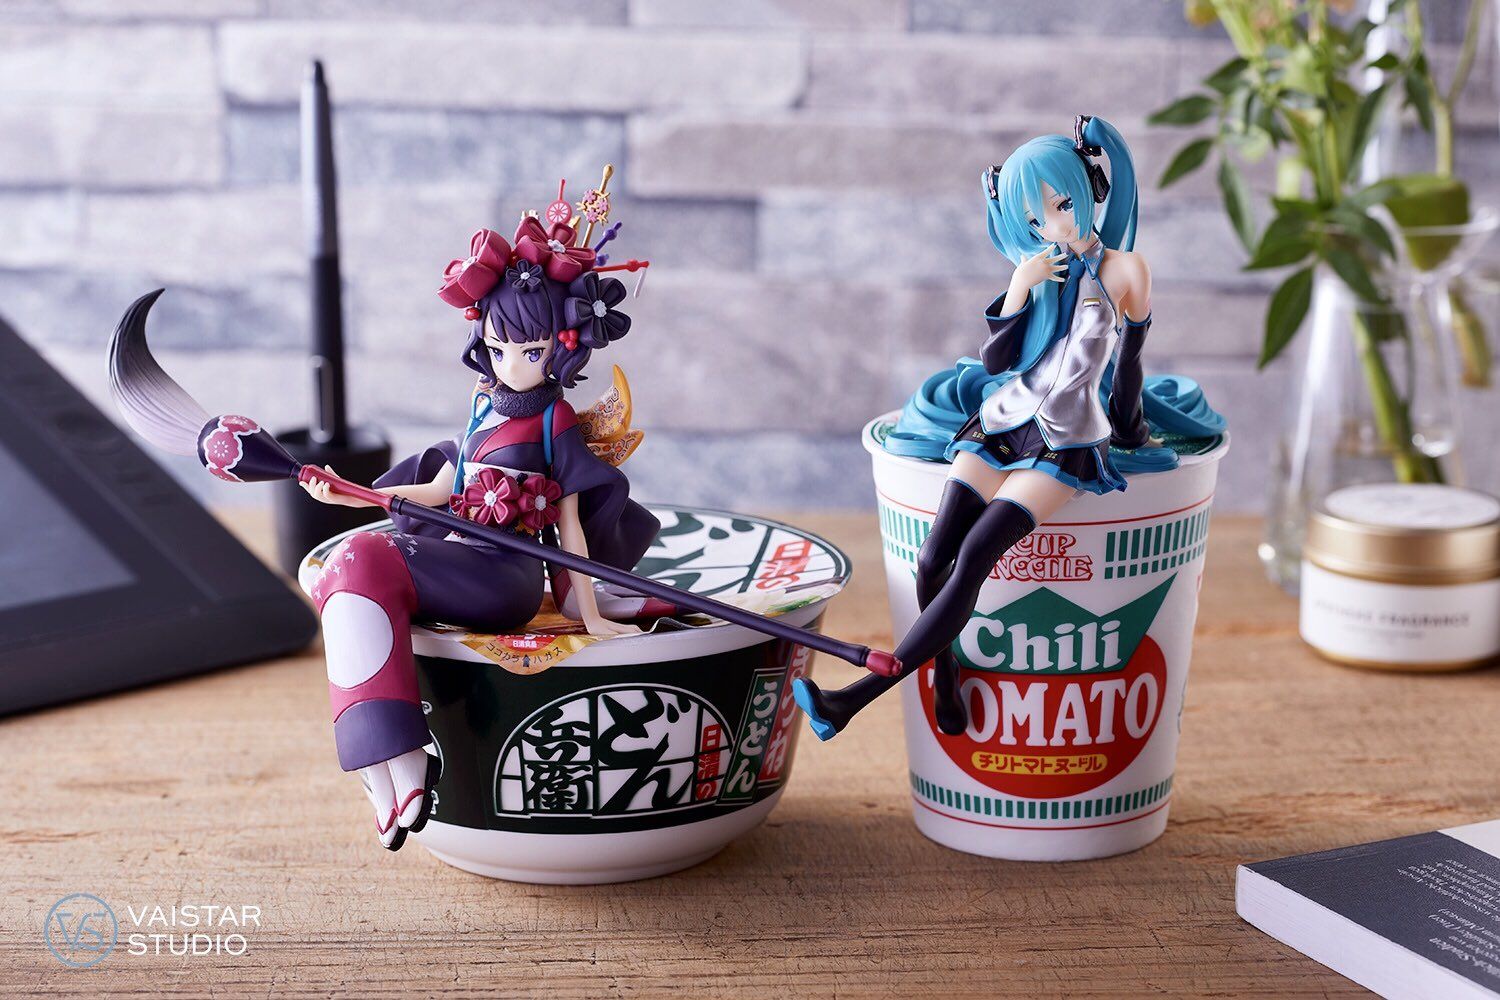 [Hatsune Miku] Nuyoru Stopper Figure, too much color and become a topic erotic 18